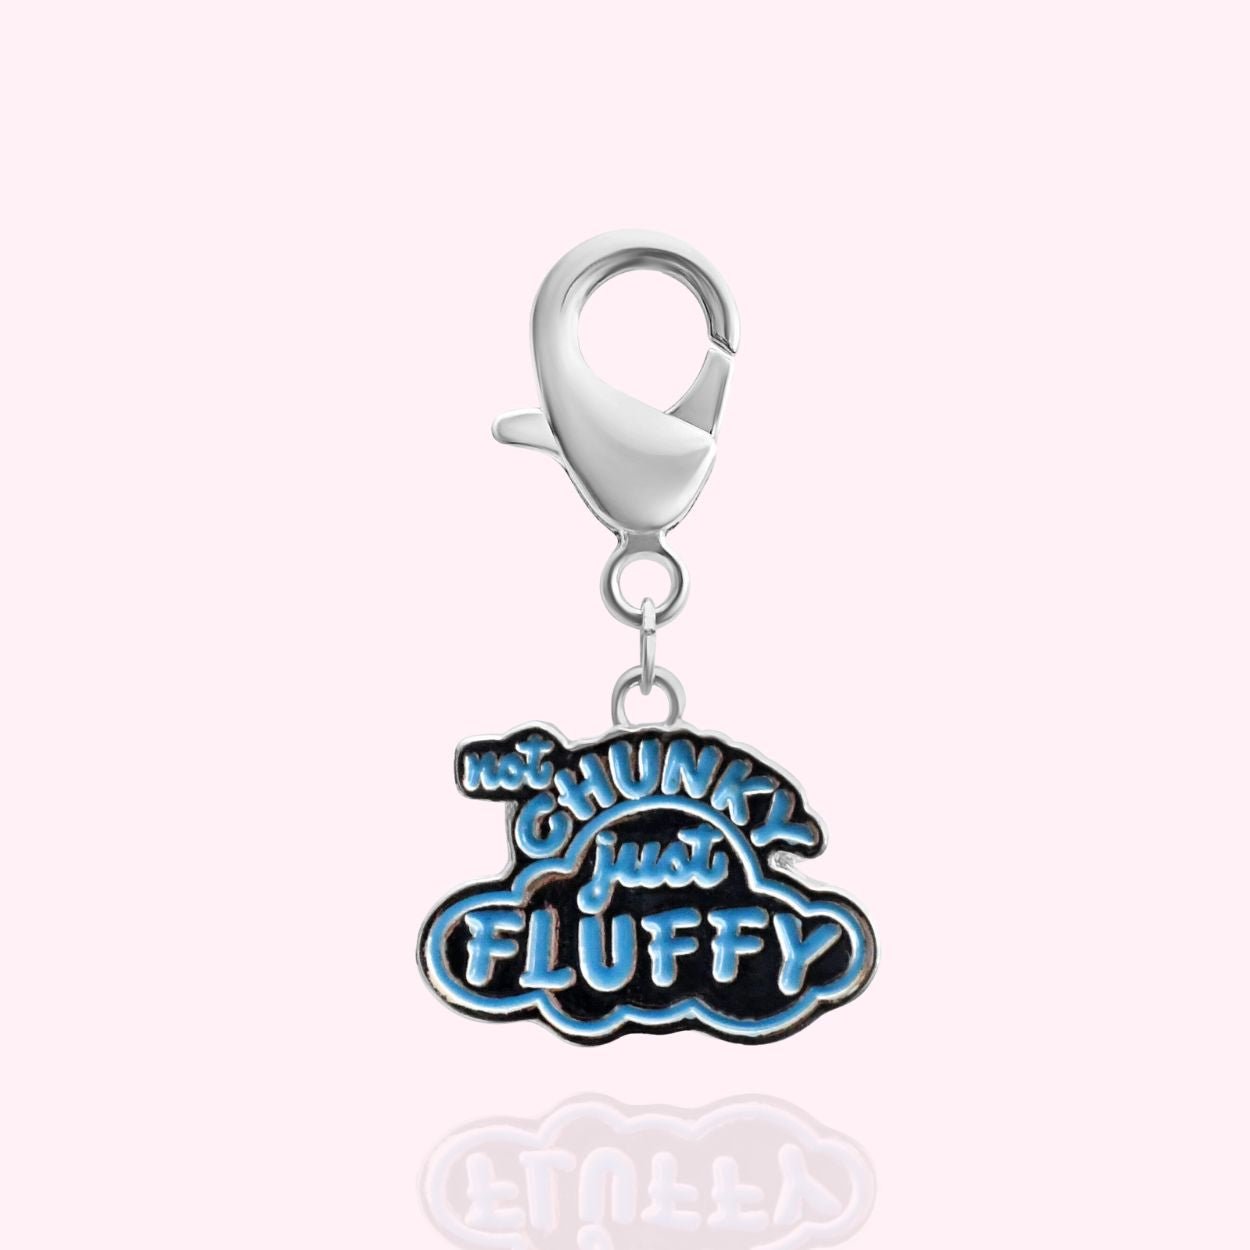 "Not Chunky Just Fluffy" Dog Collar Charm - Silver - Doggy Style Pet Products